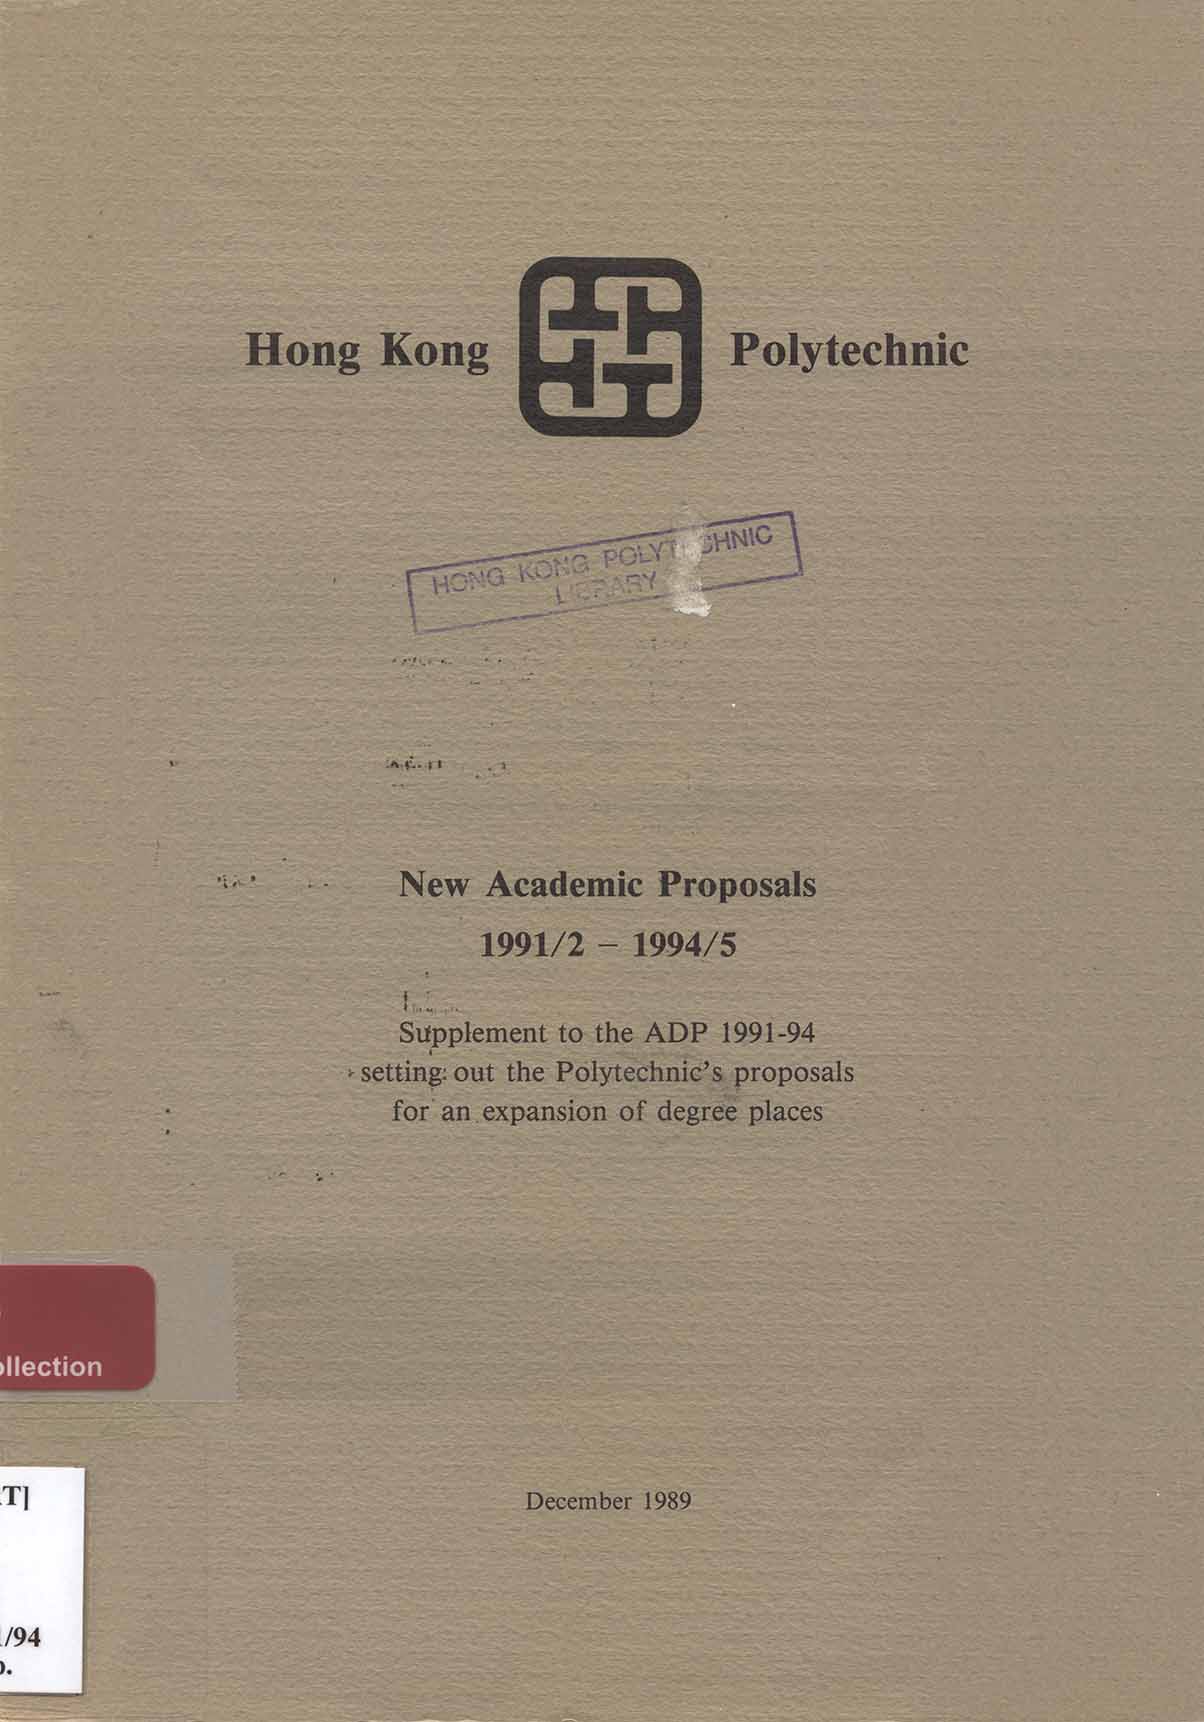 New Academic Proposals 1991/2-1994/5 - Supplement to the ADP 1991-94 setting out the Polytechnic's proposals for an expansion of degree places 